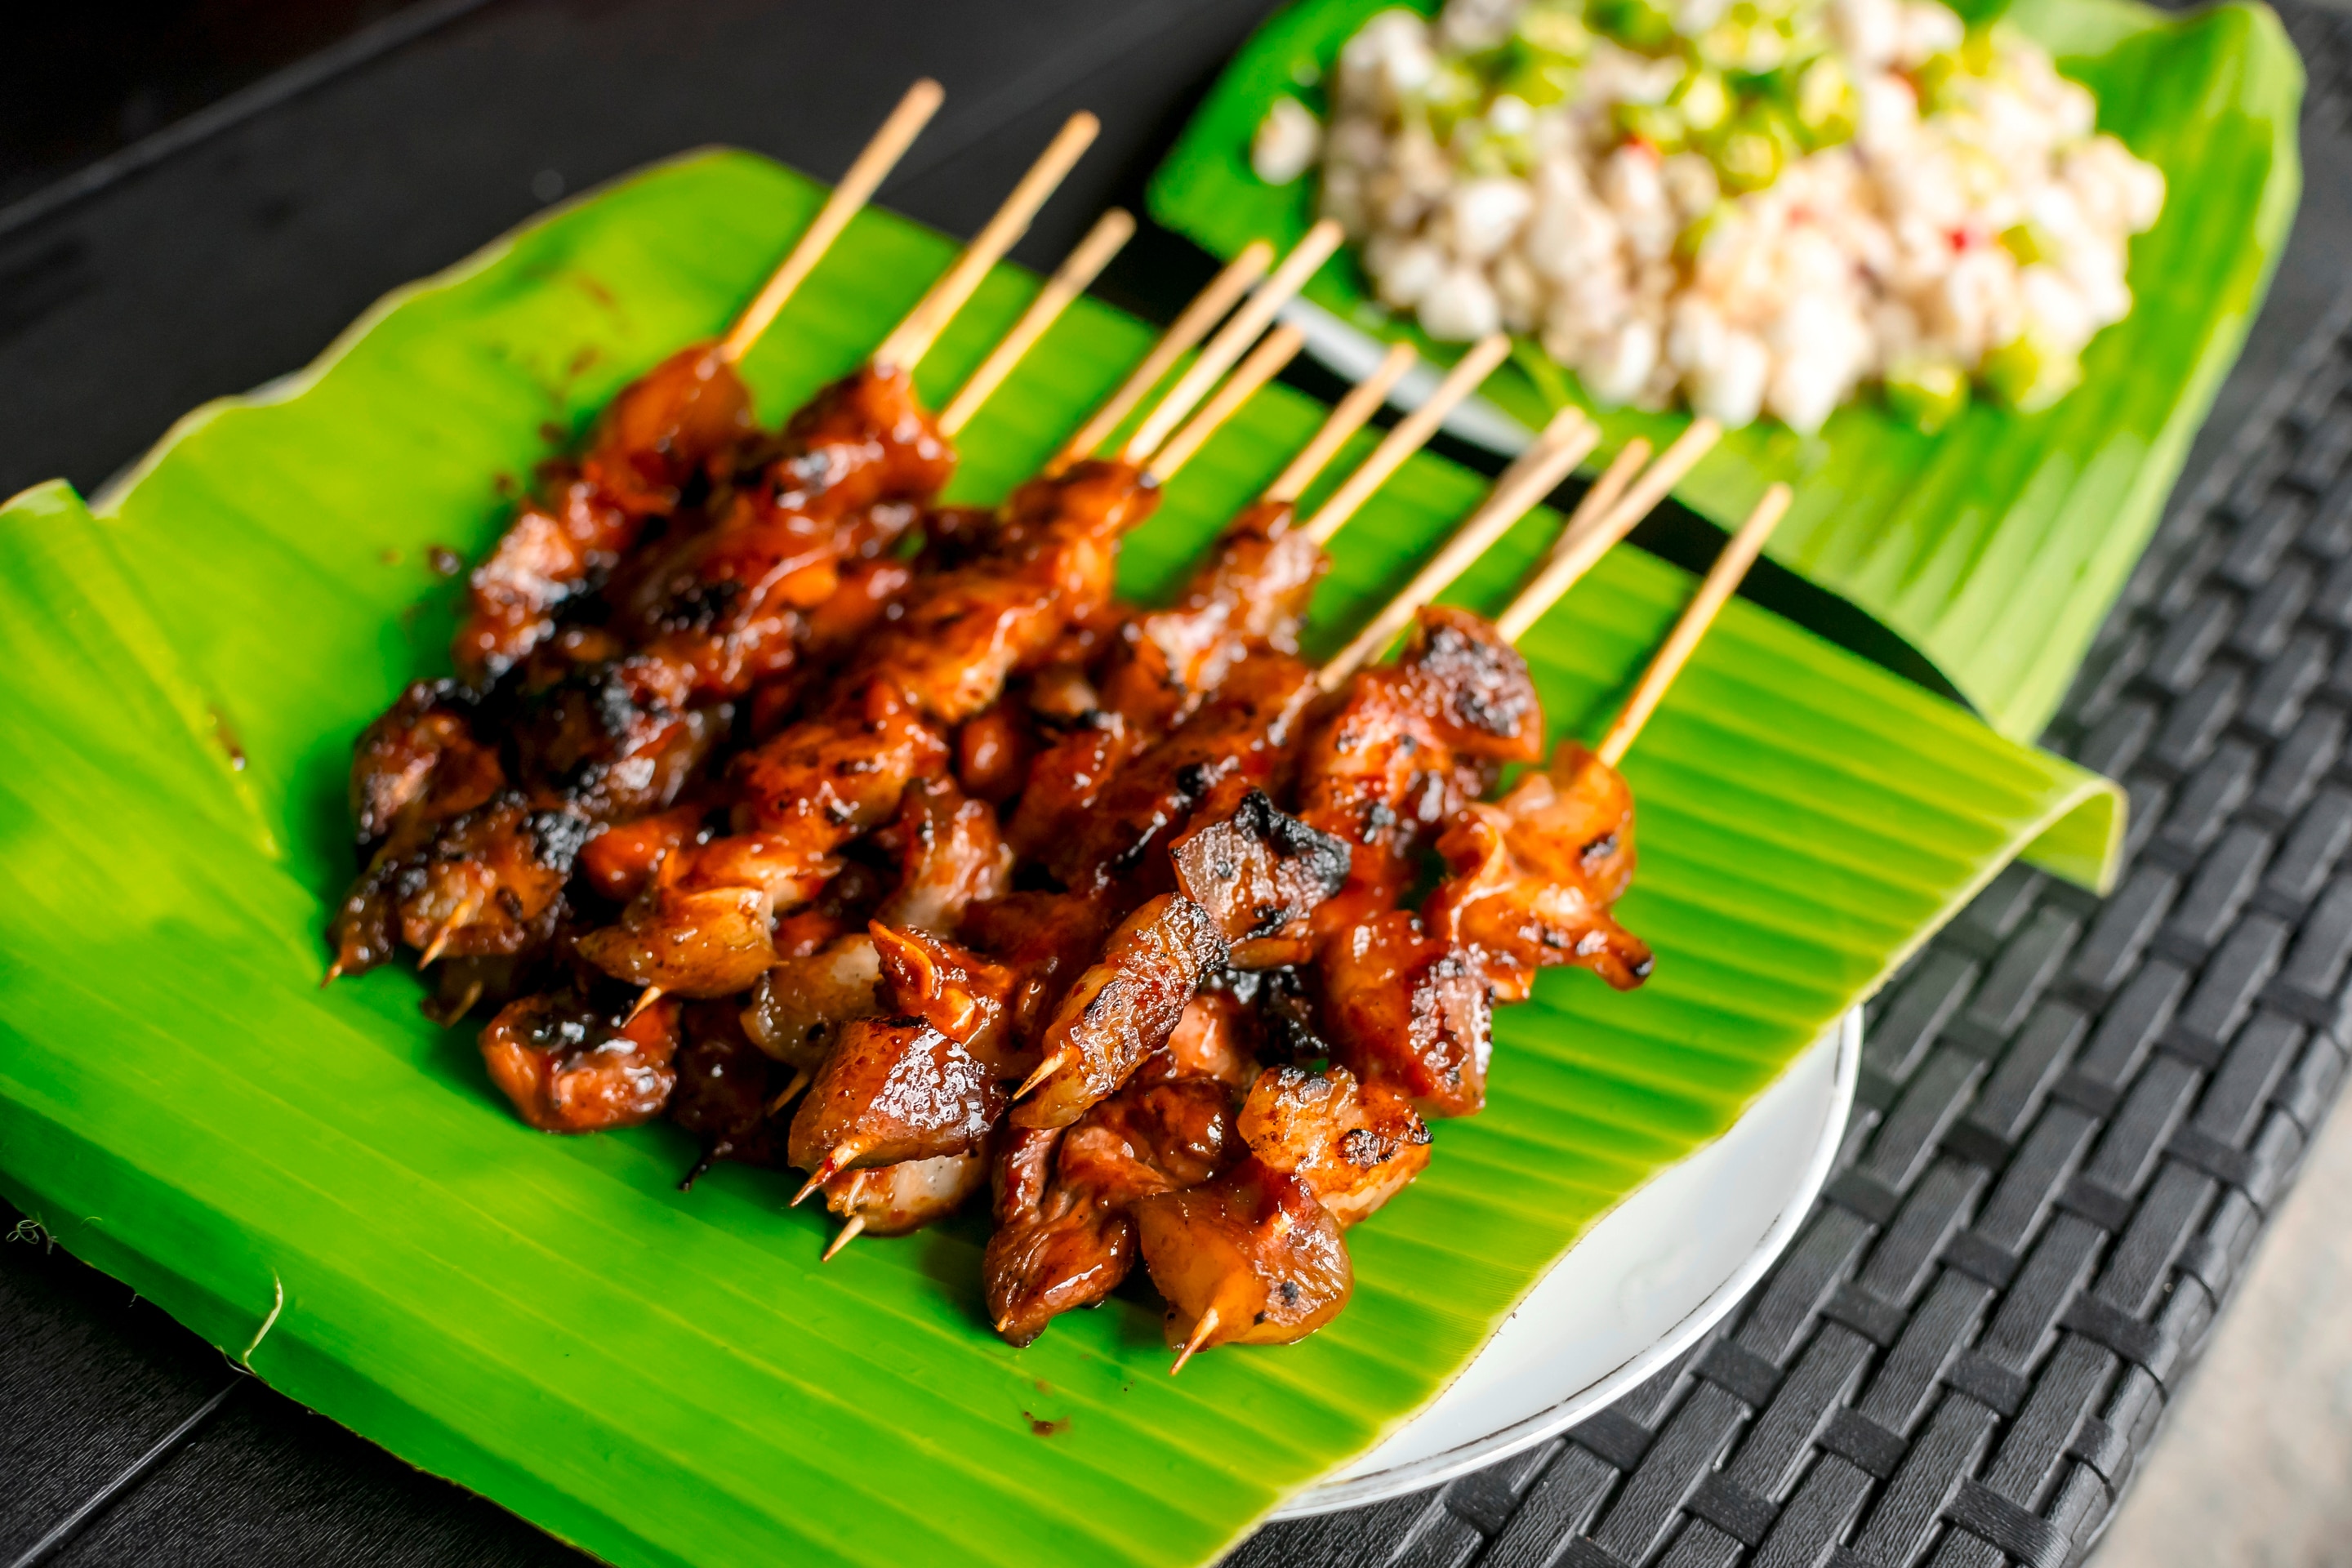 How To Make Filipino Pork BBQ Perfectly Sweet, Smoky, and Sticky